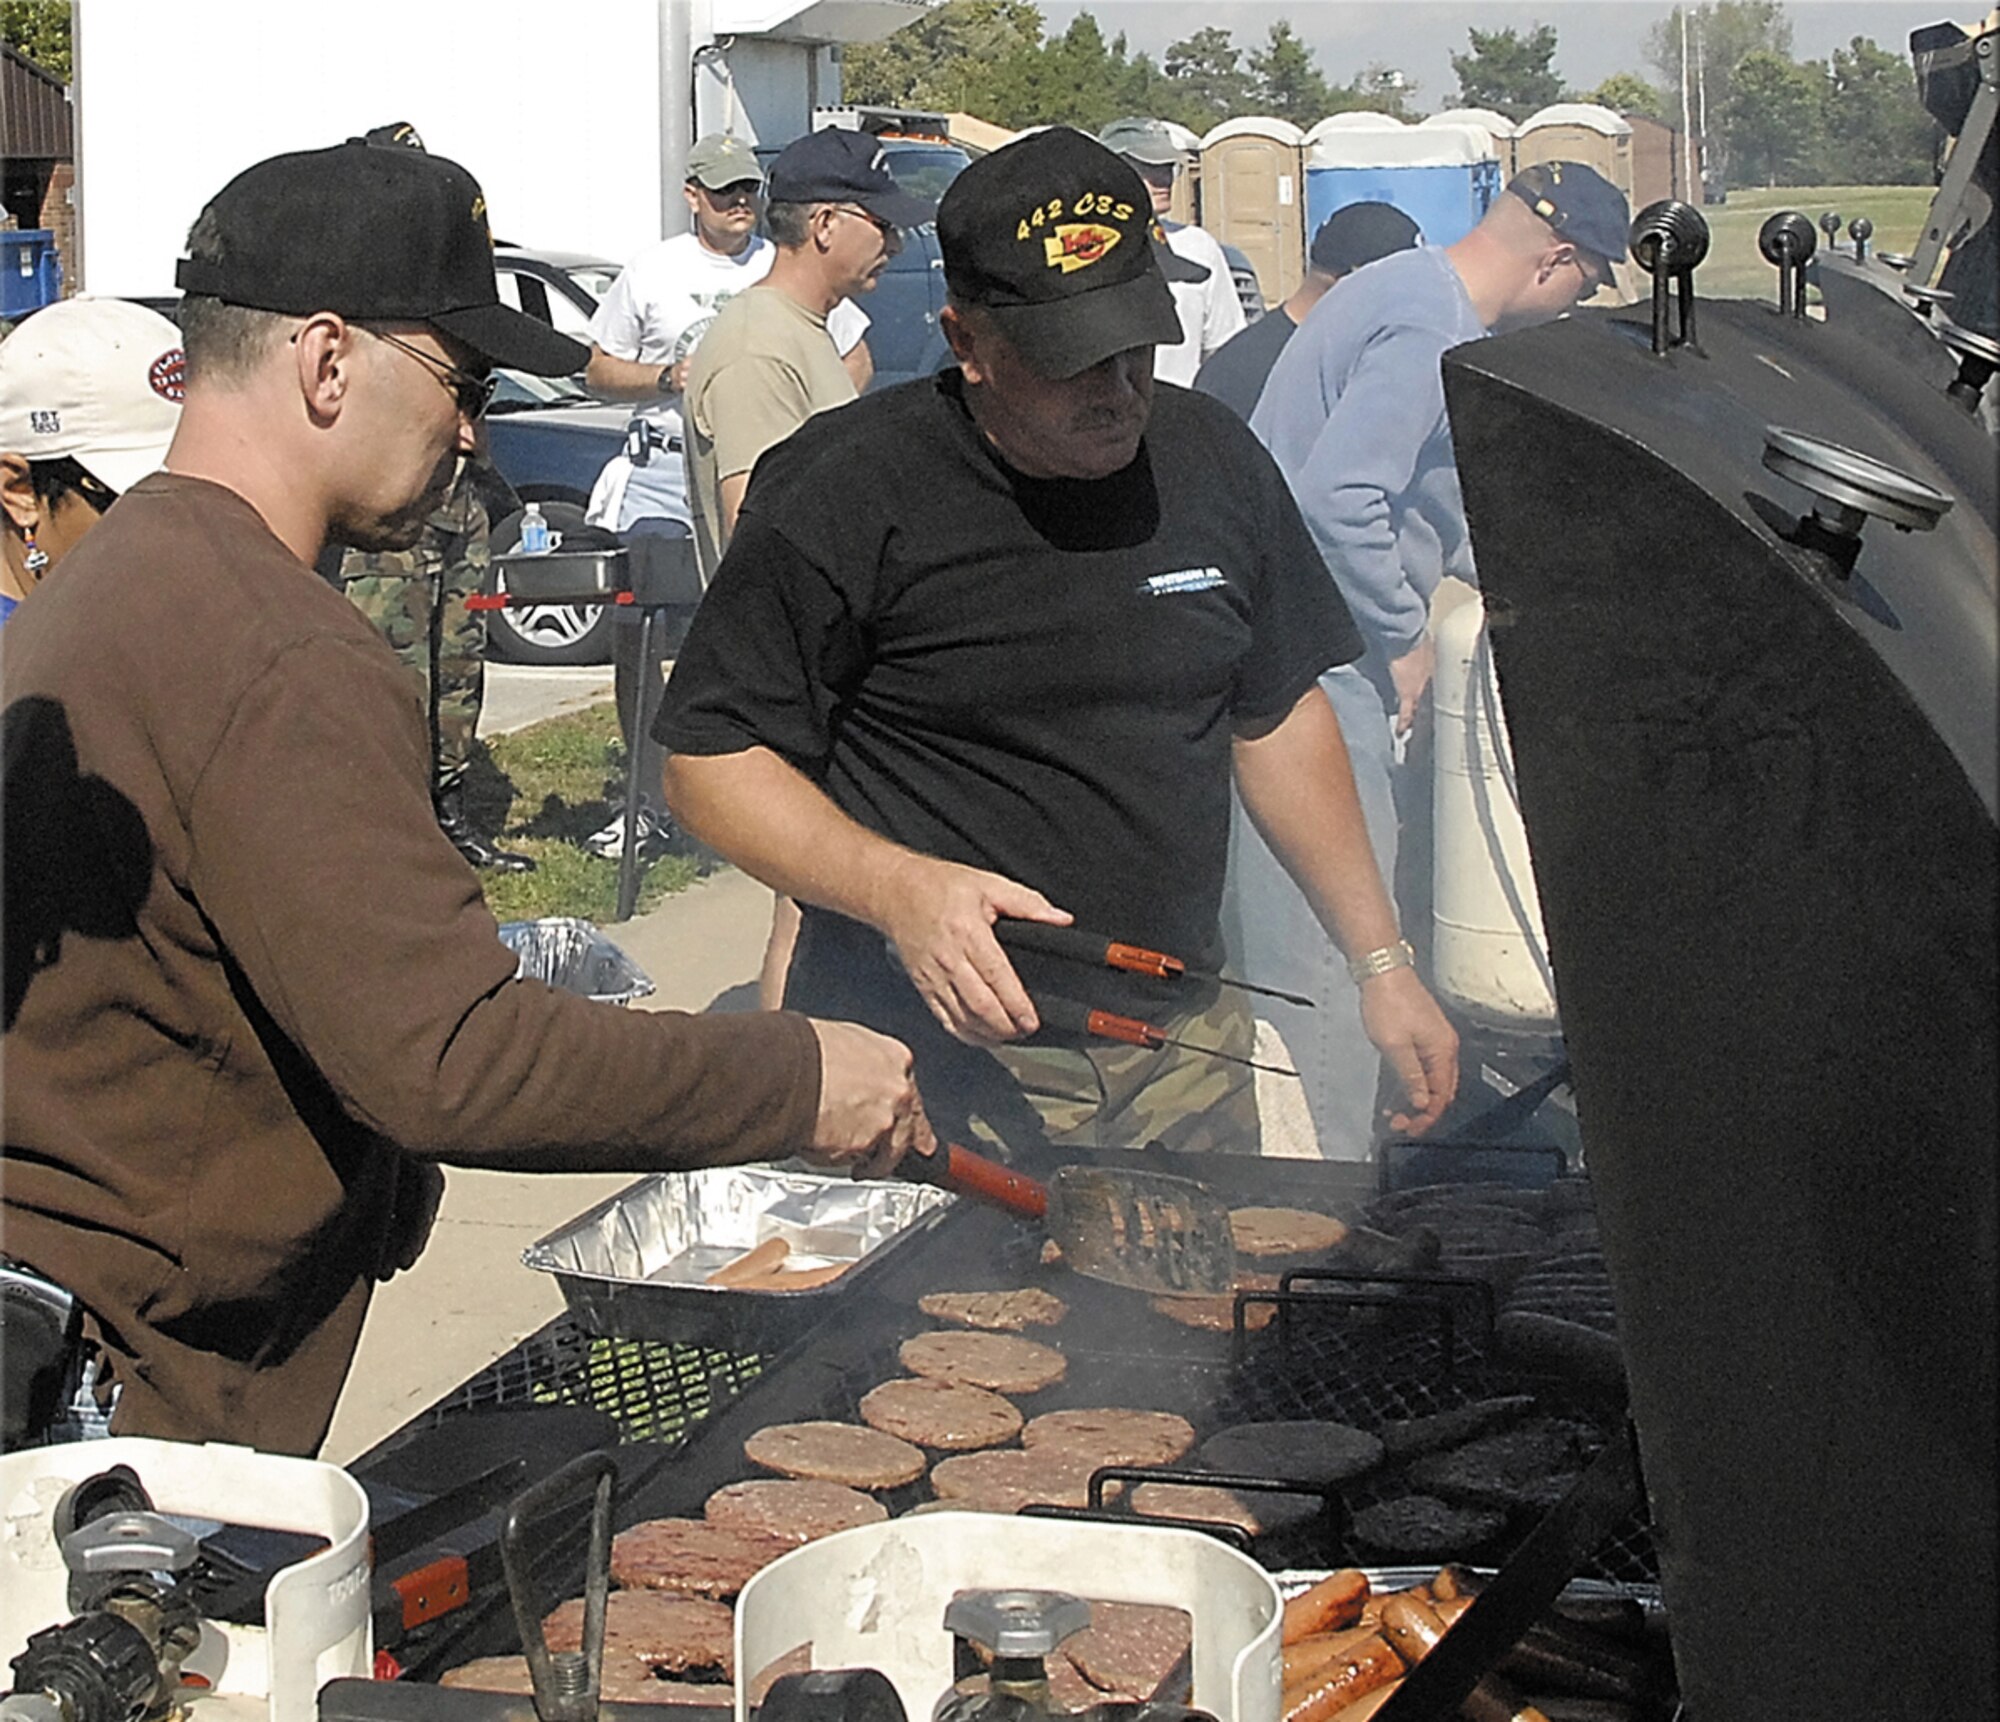 At the 442nd Fighter Wing's Family Appreciation Day, food preparation was a non-stop effort as Wing members and their families enjoyed  burgers, brats, beans and other fare Oct. 14, 2007. The 442nd Fighter Wing is an Air Force Reserve Command A-10 Thunderbolt II unit based at Whiteman AFB, Mo. (US Air Force photo/Master Sgt. John Vertreese)